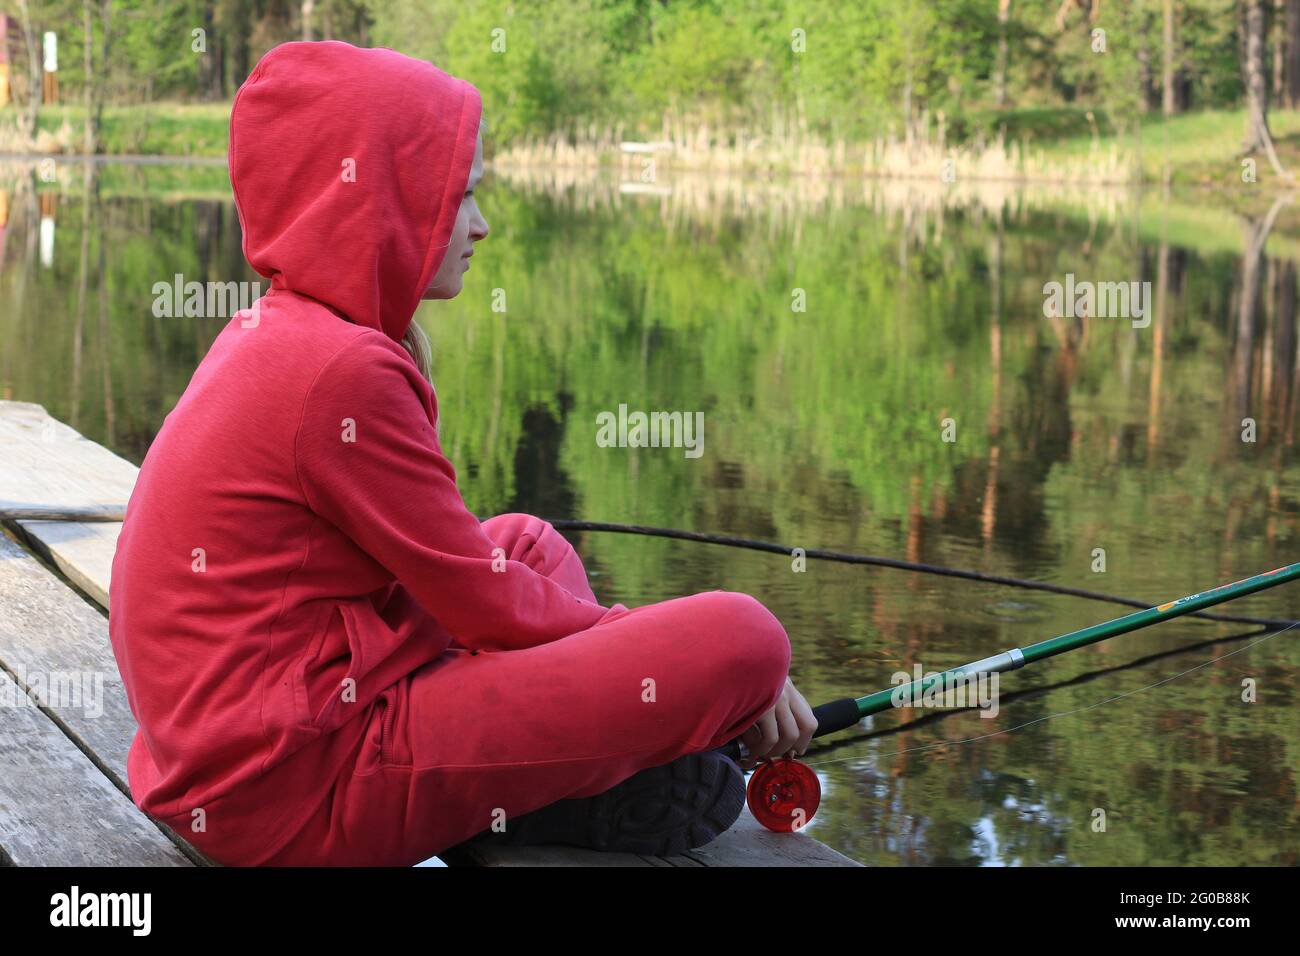 A girl in a red tracksuit is fishing in a forest lake sitting on a wooden